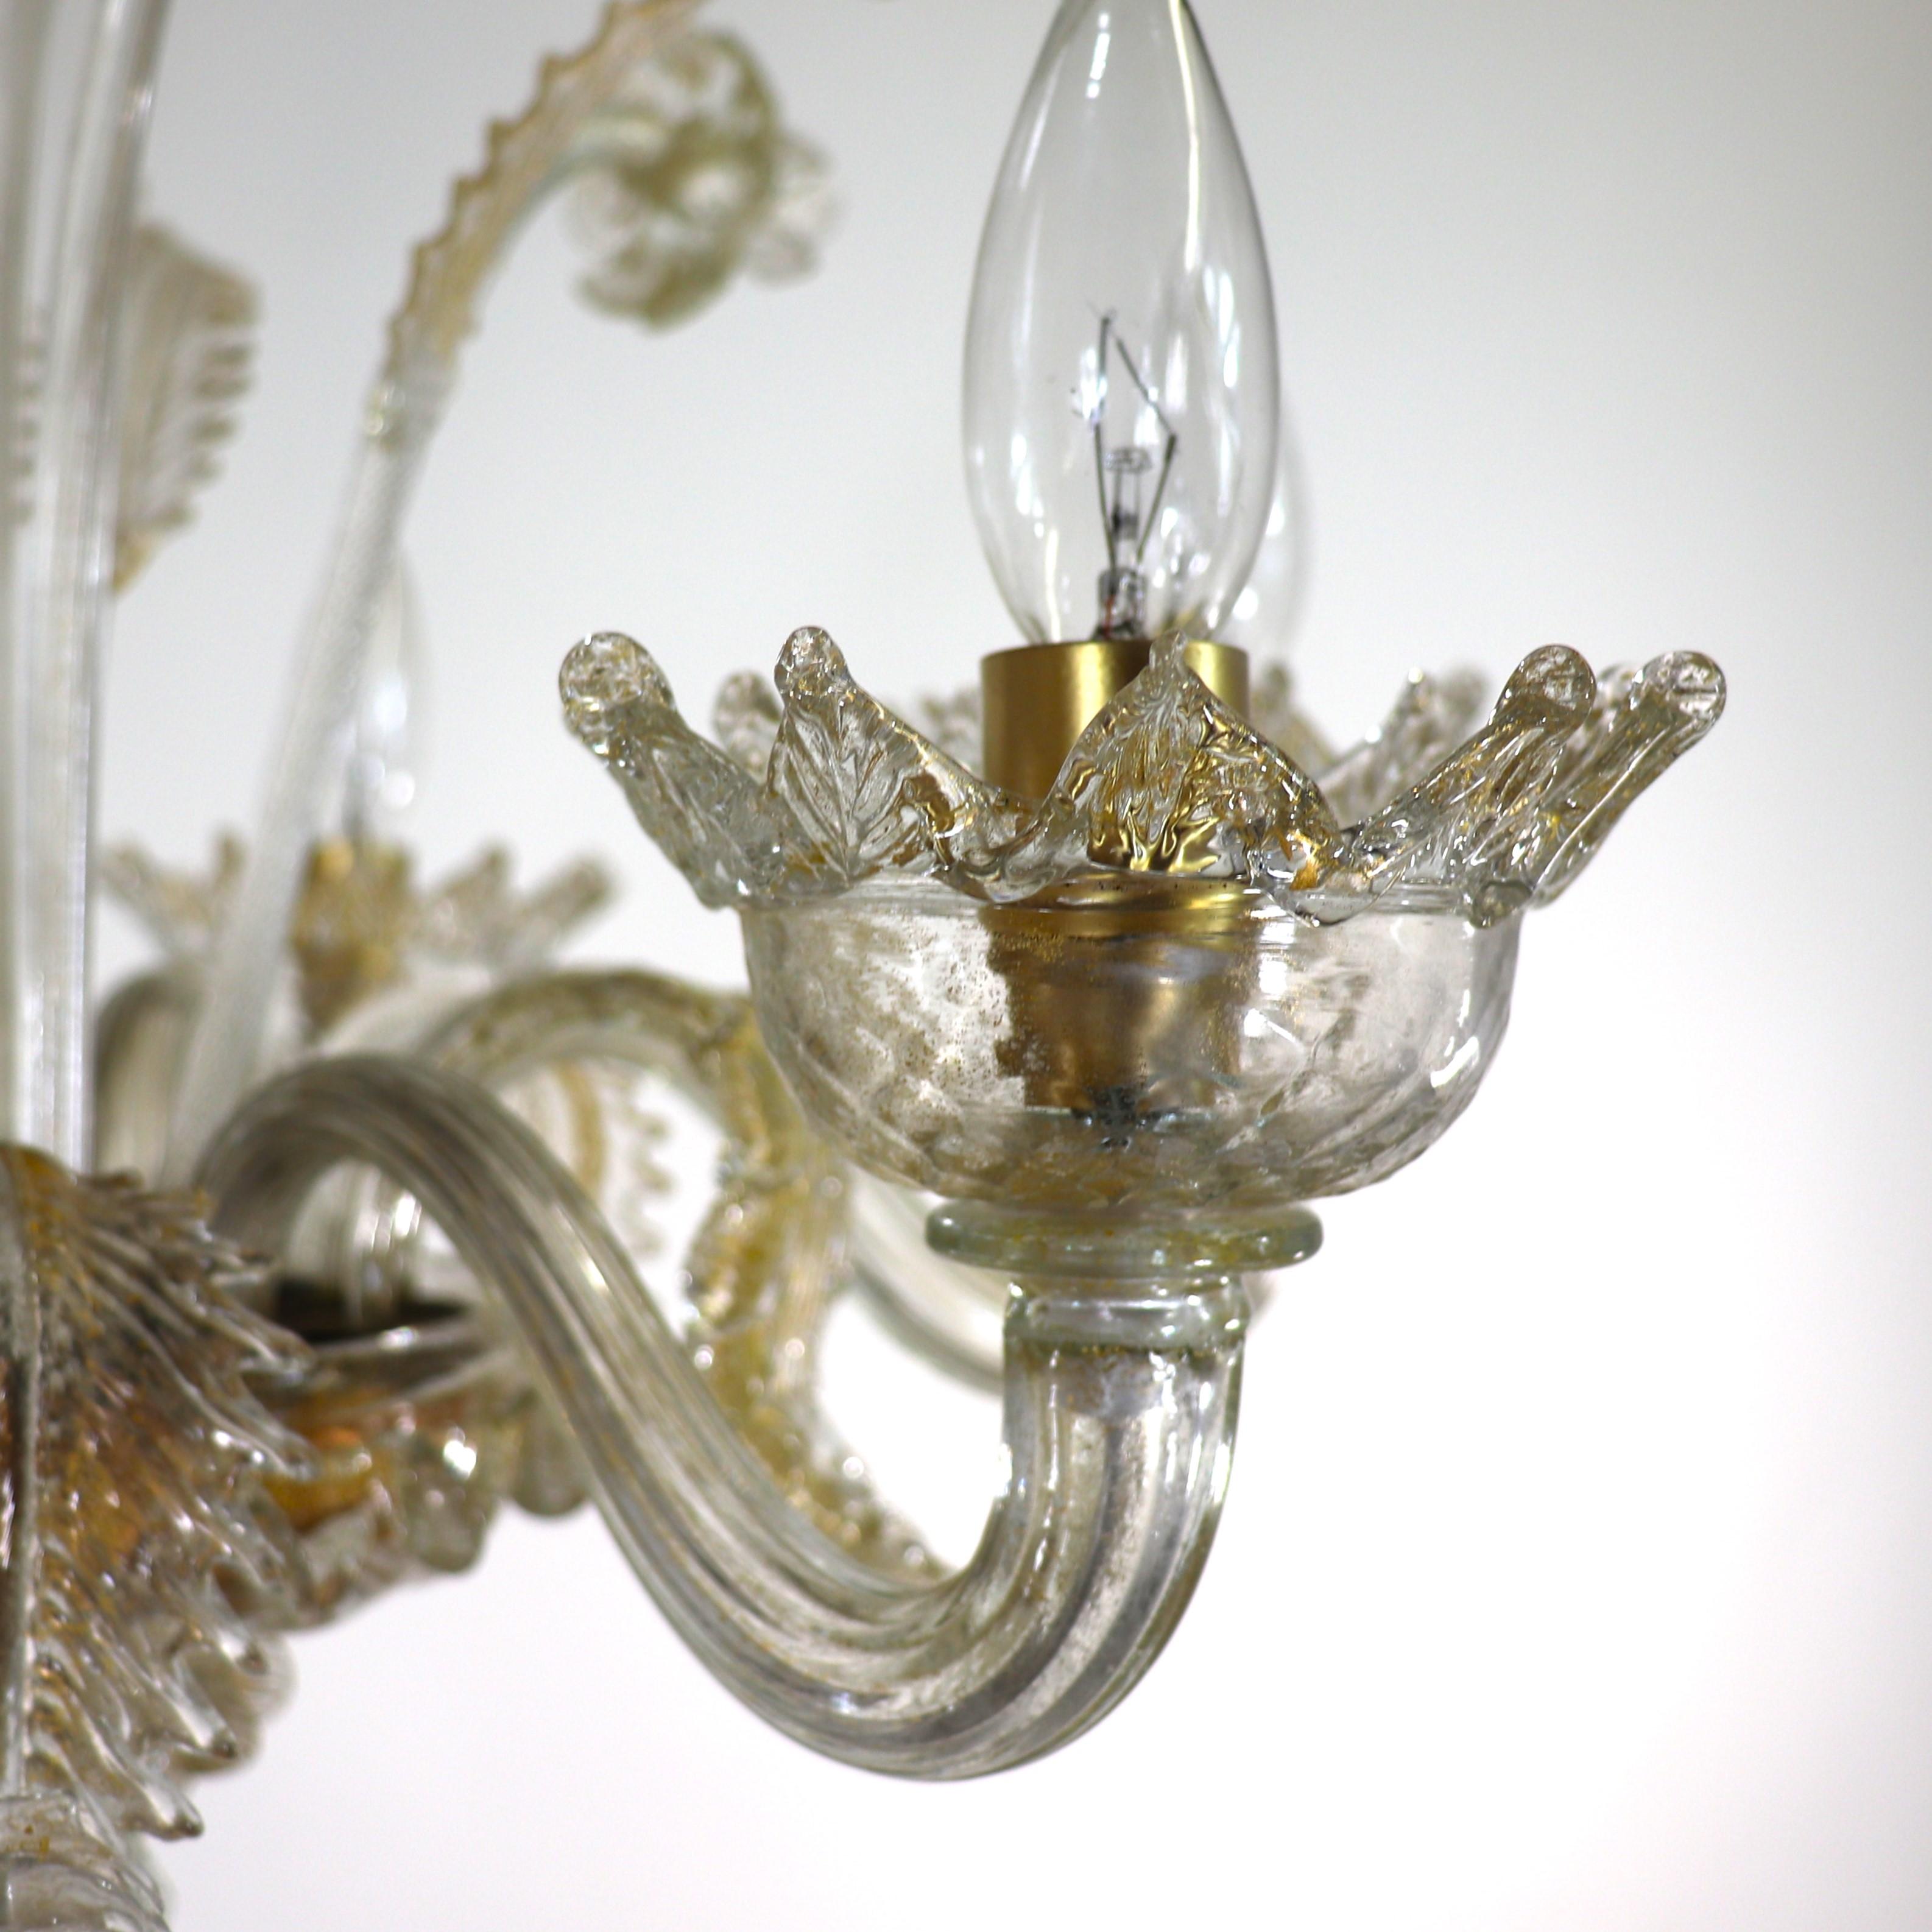  Vintage Baroque Style Gold Infused Cristallo Murano Chandelier For Sale 4